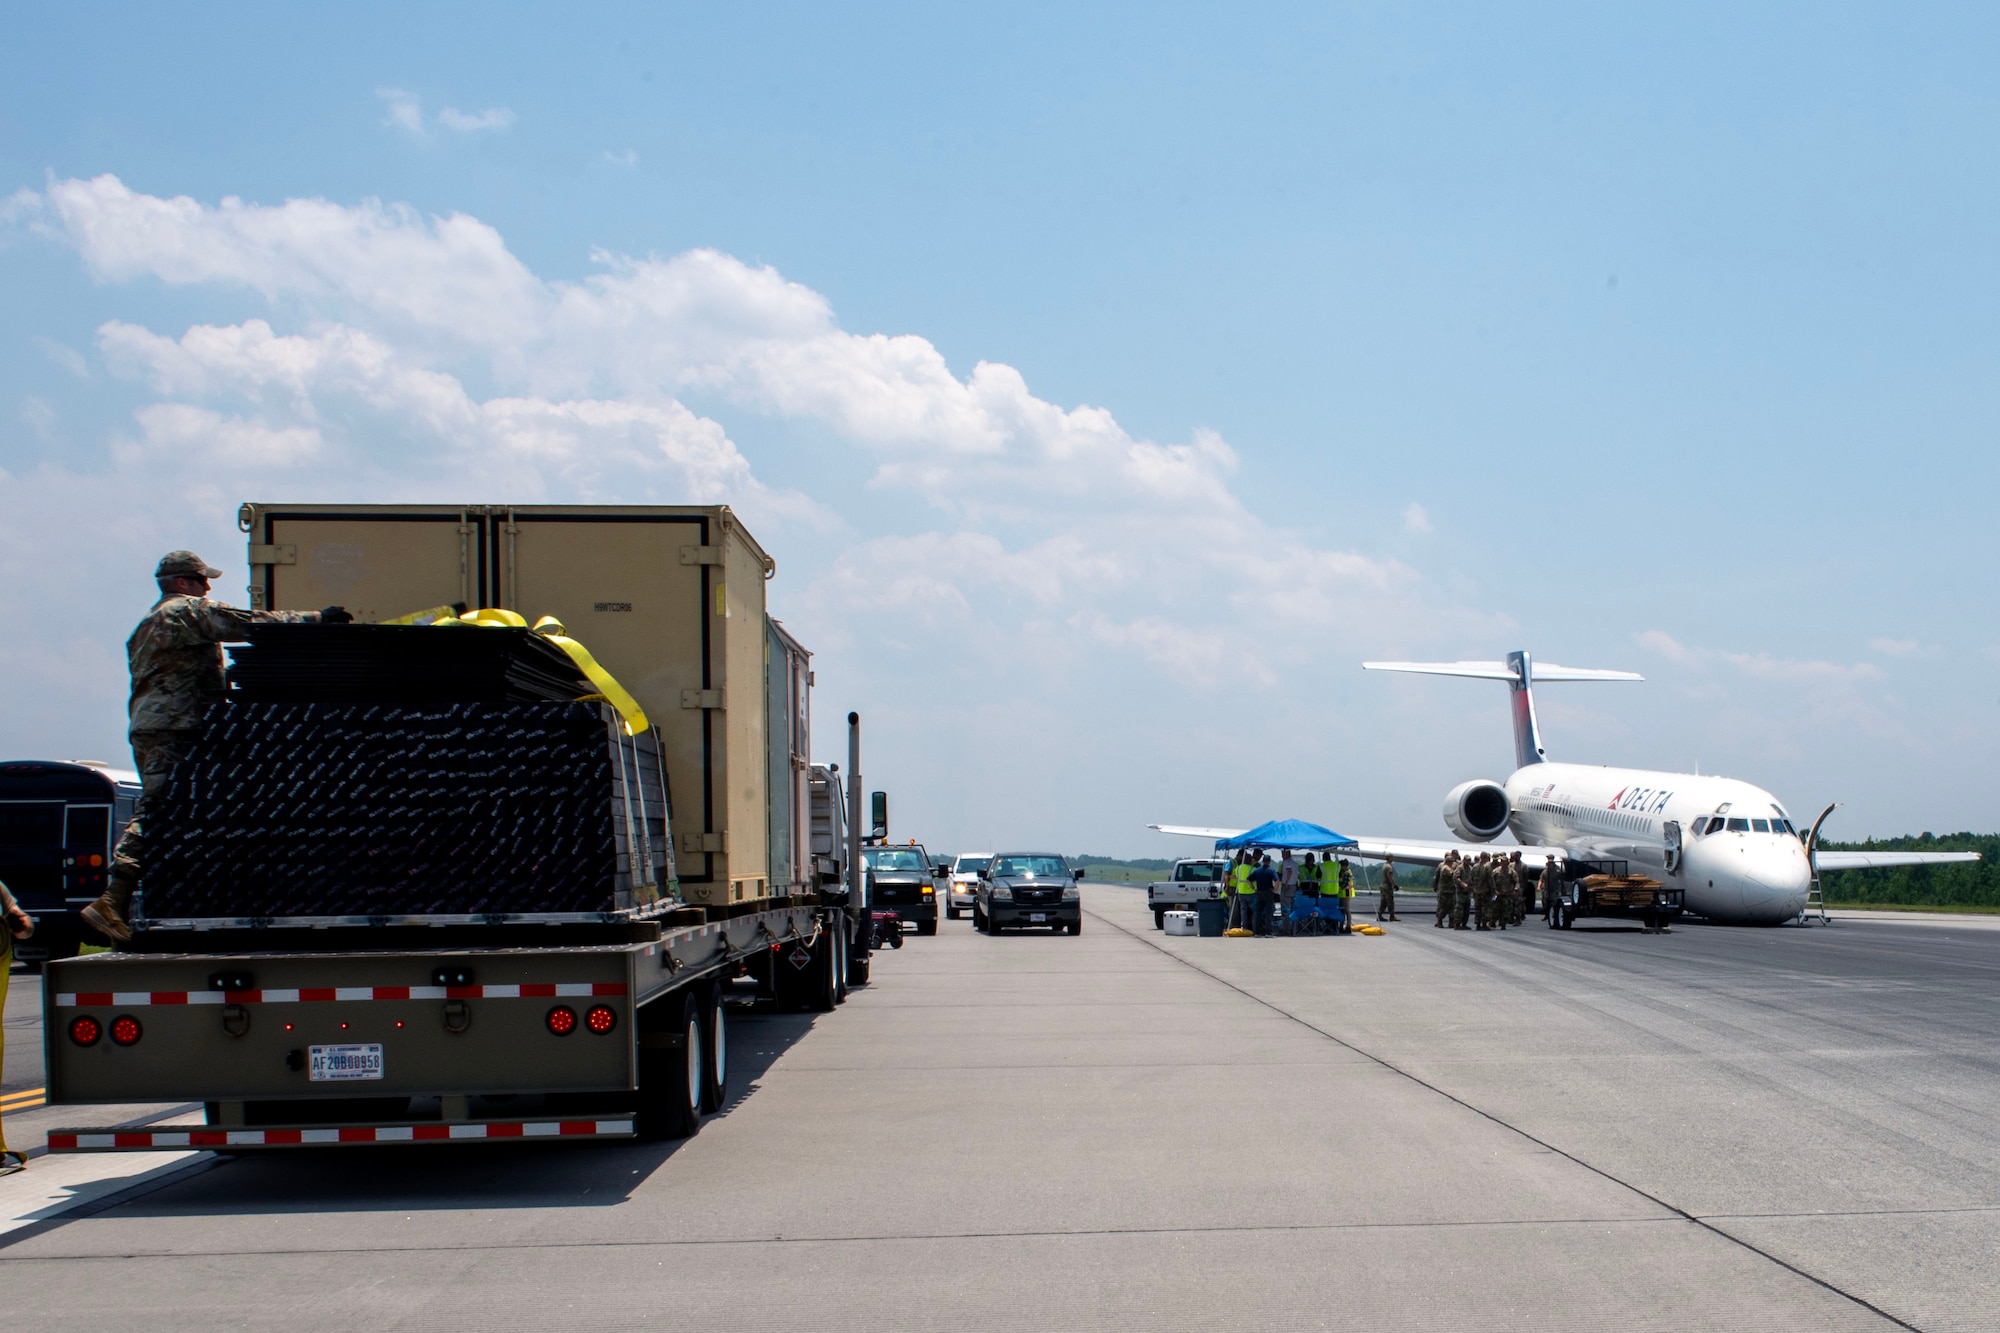 North Carolina Air National Guard assists with aircraft lift due to Delta Airlines flight 1092 making an emergency landing on the Charlotte-Douglas International Airport’s runway June28.